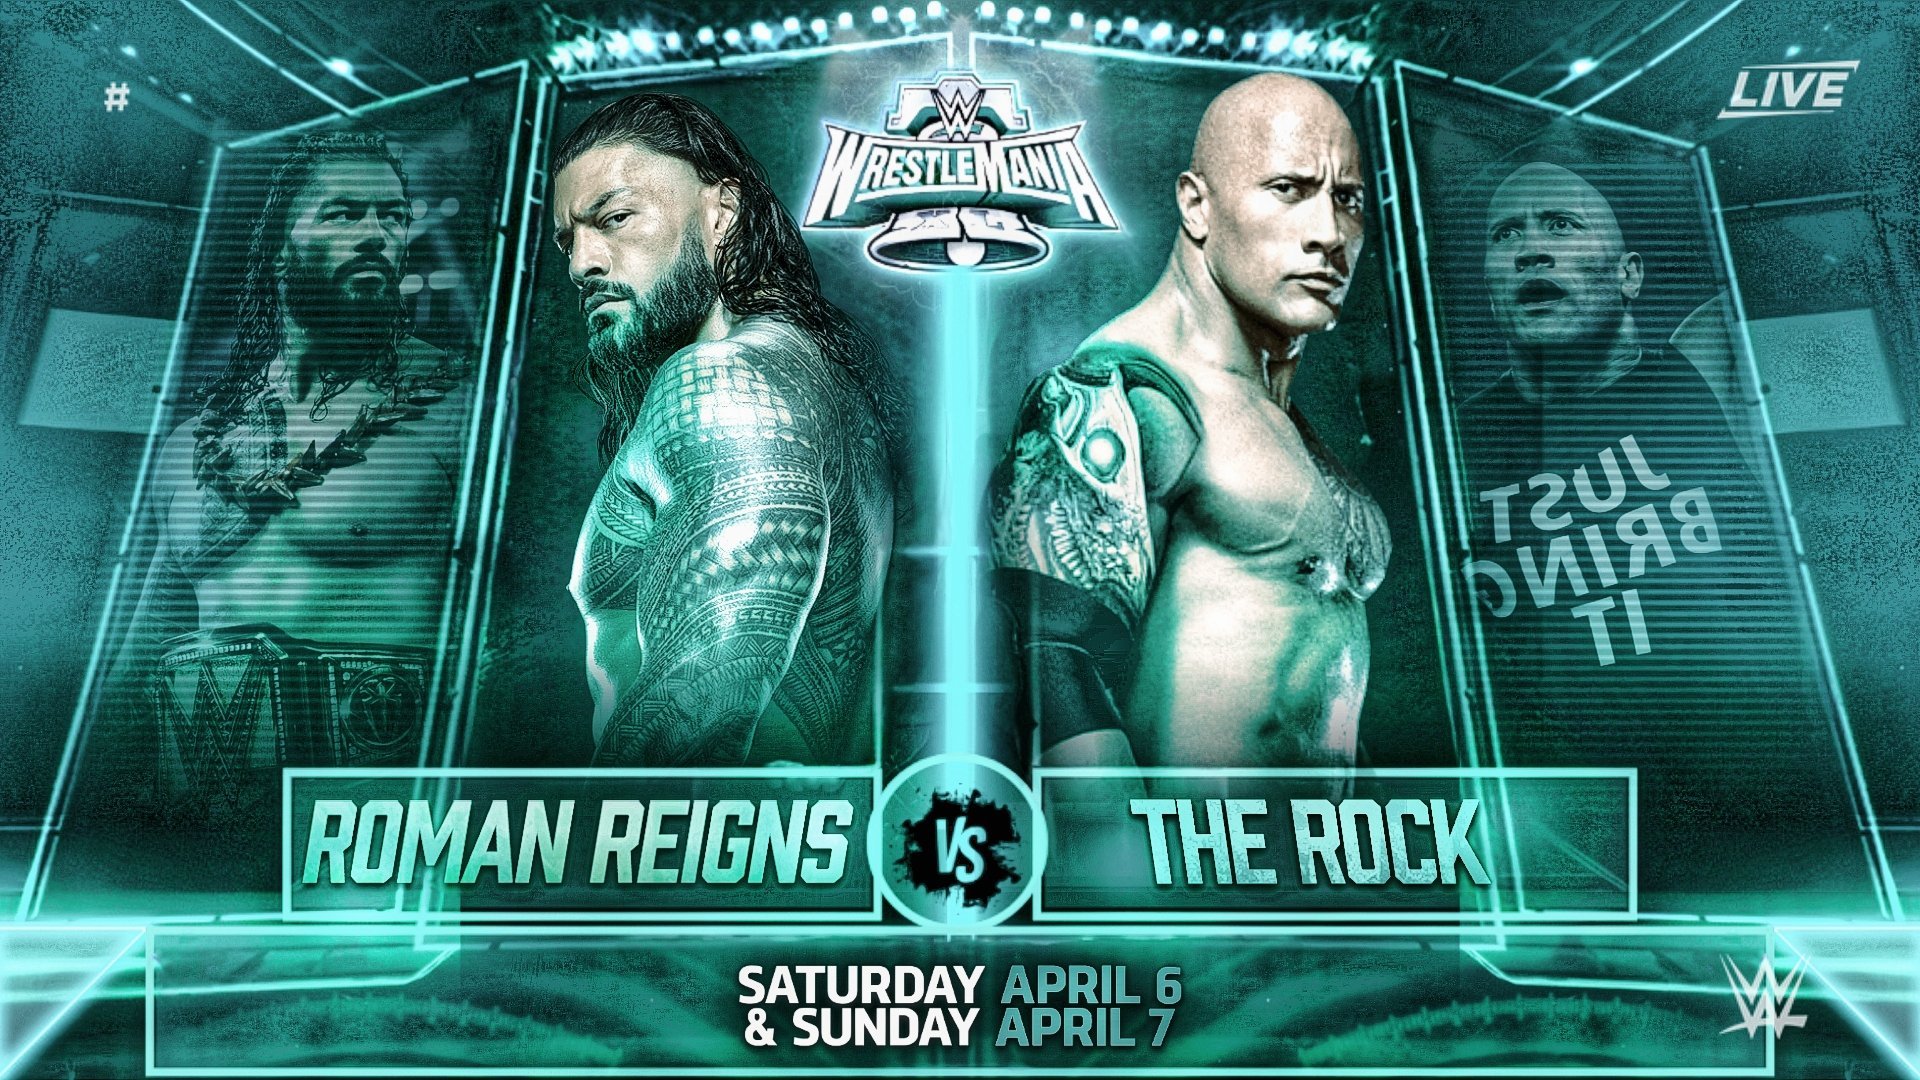 WWE’s Plans for The Rock vs. Roman Reigns Match at WrestleMania XL Being Discussed